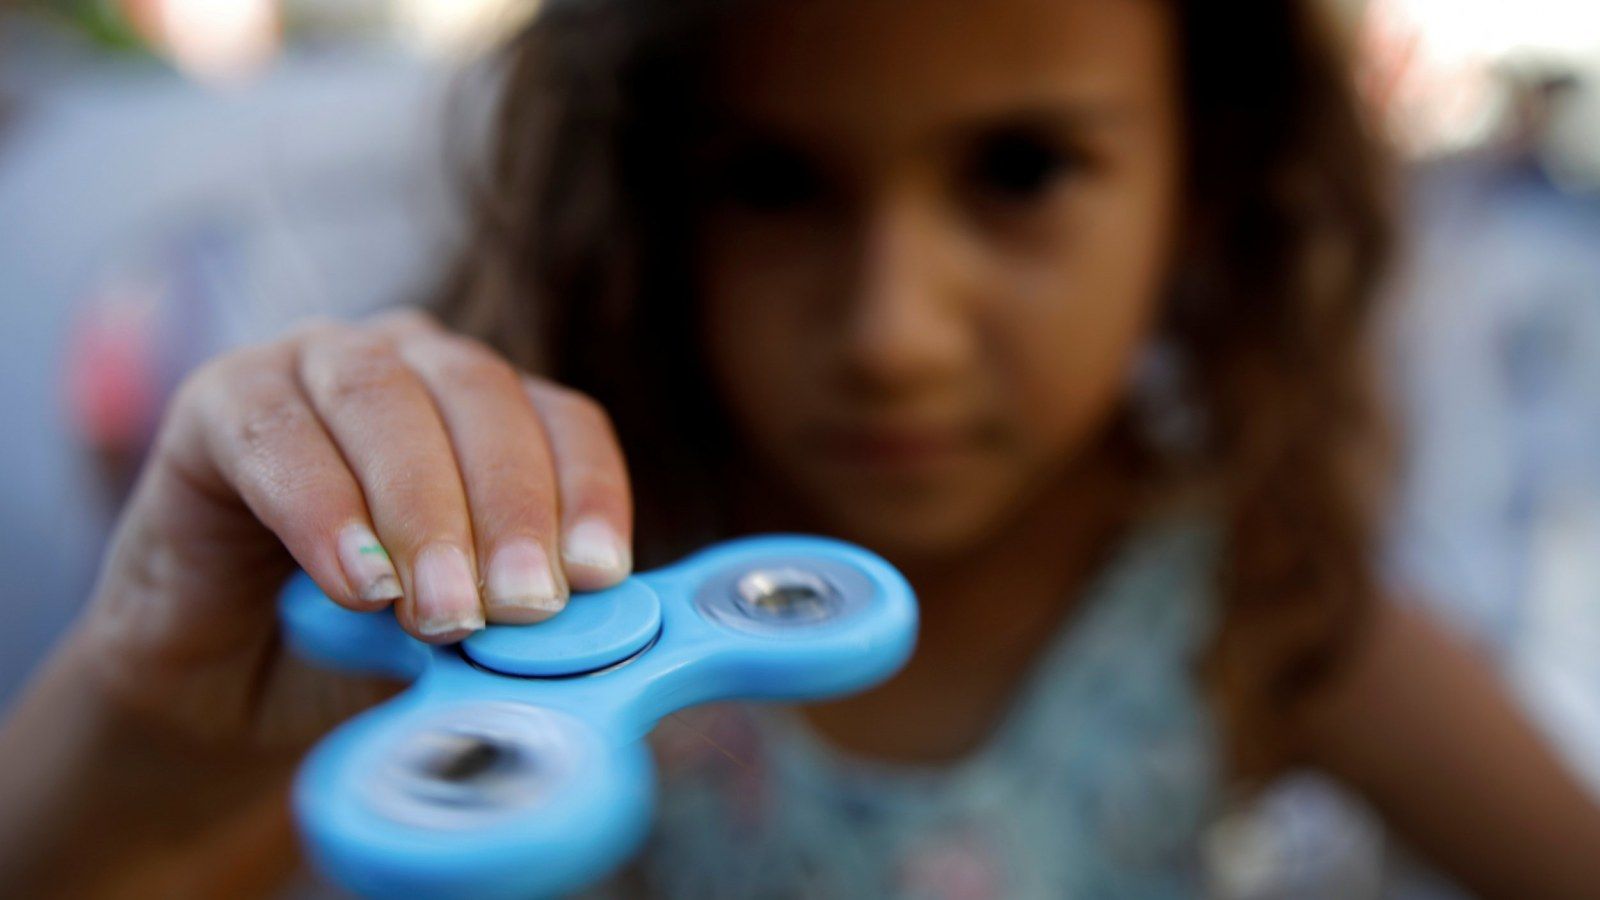 Do Fidget Spinners Help Anxiety and ADHD? Experts Are Skeptical